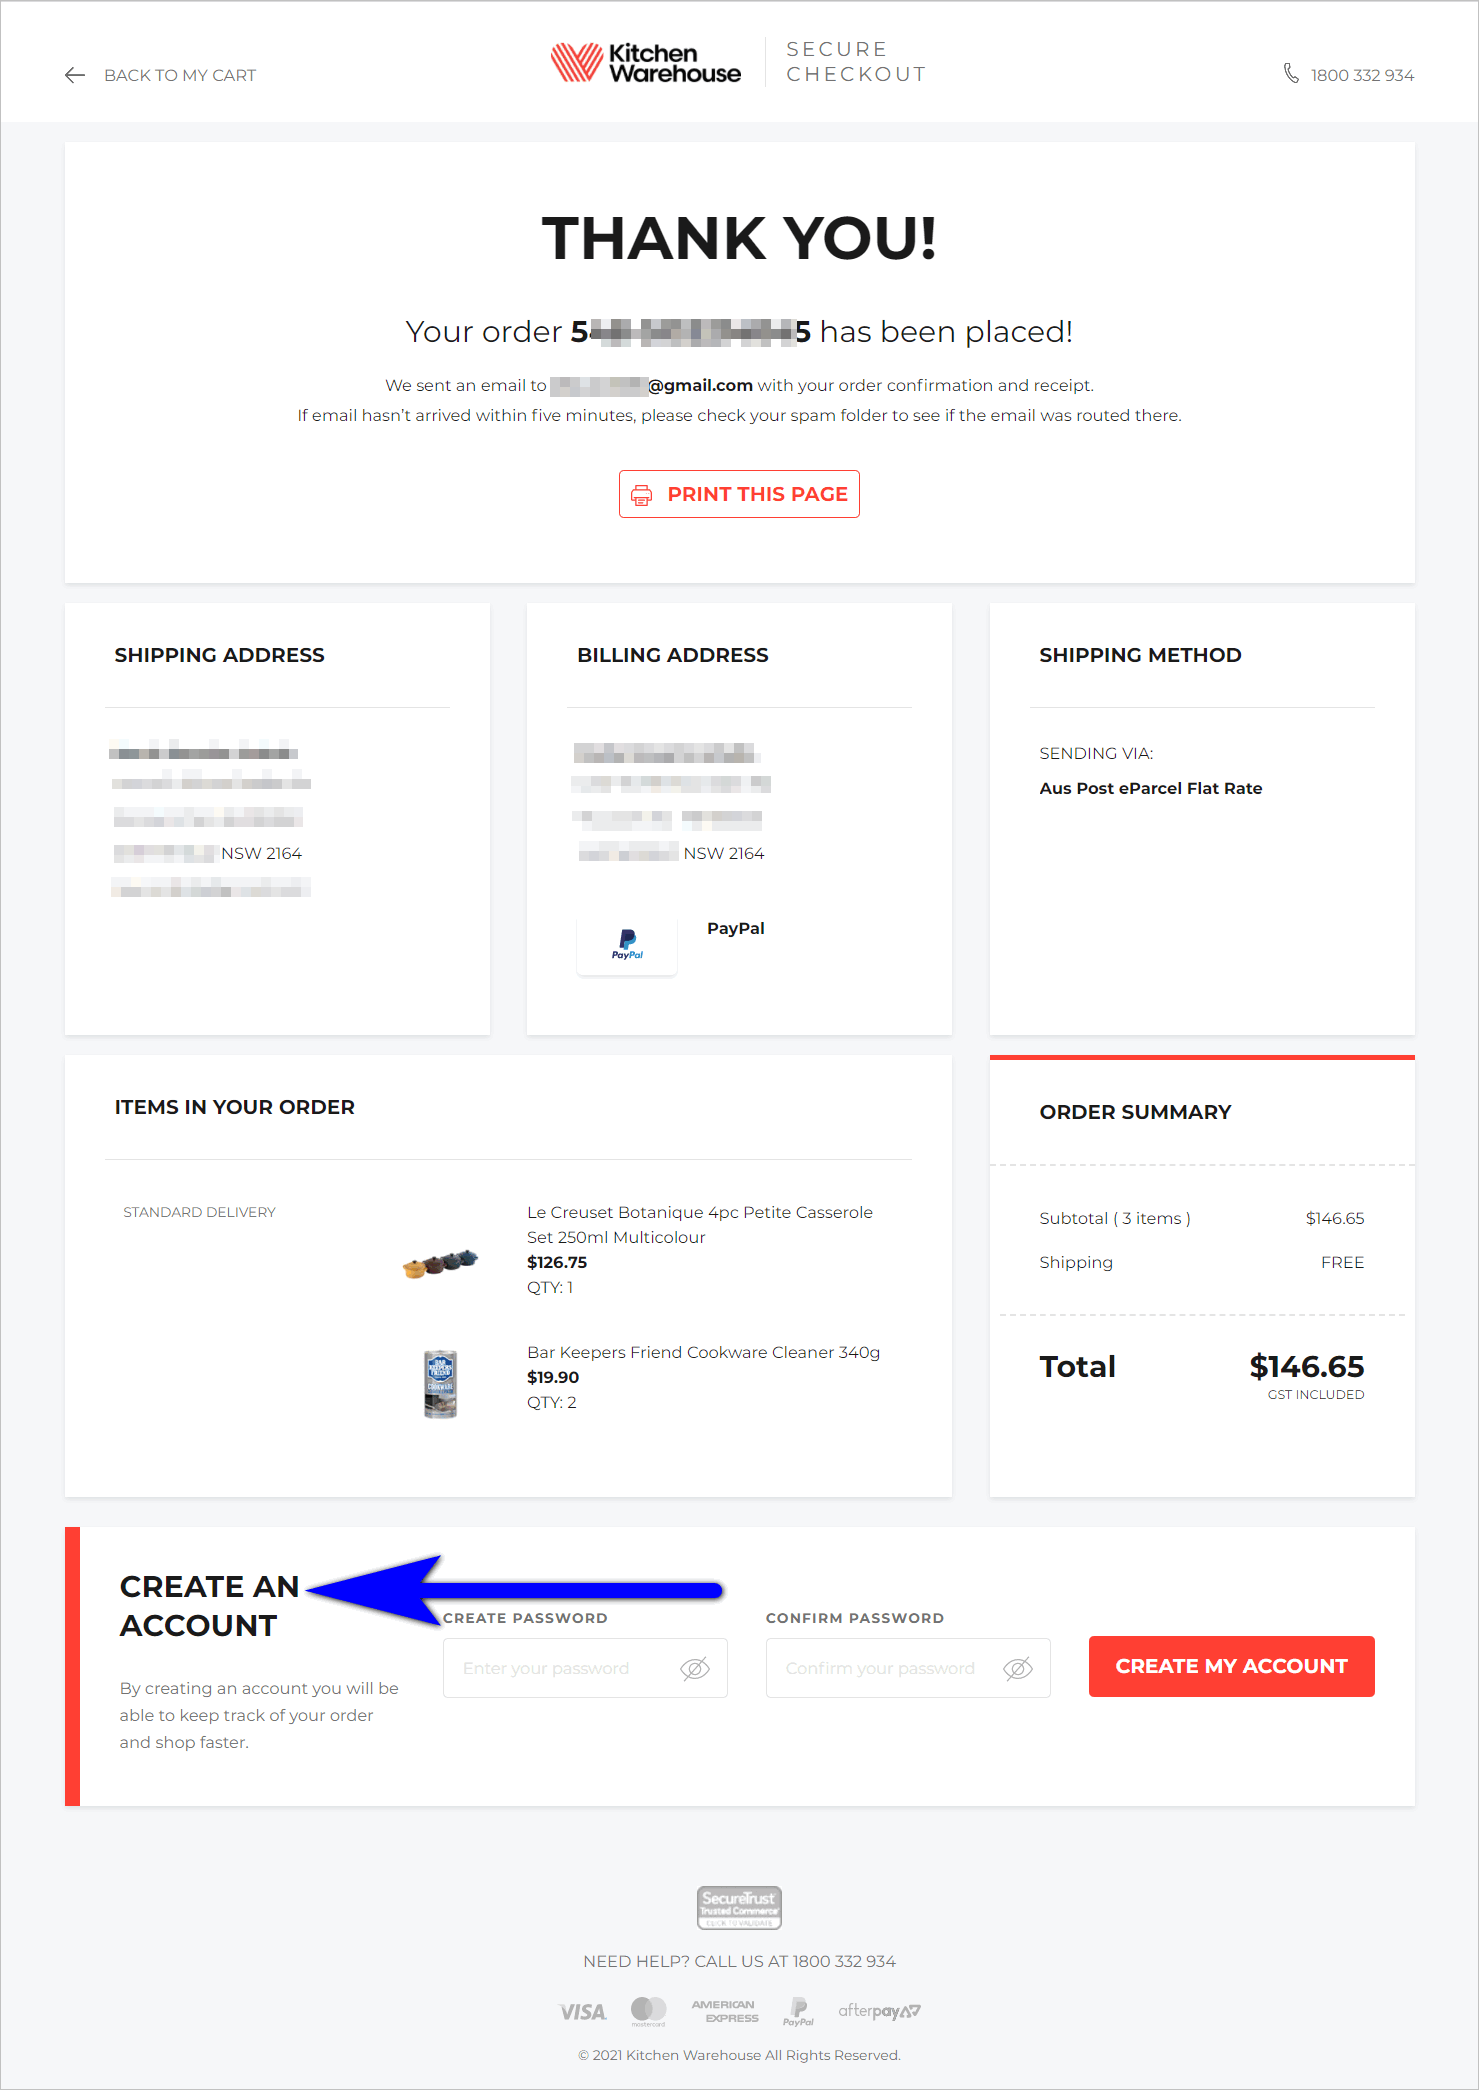 Order confirmation page with a Create an Account section at the bottom, below the order details and order summary sections